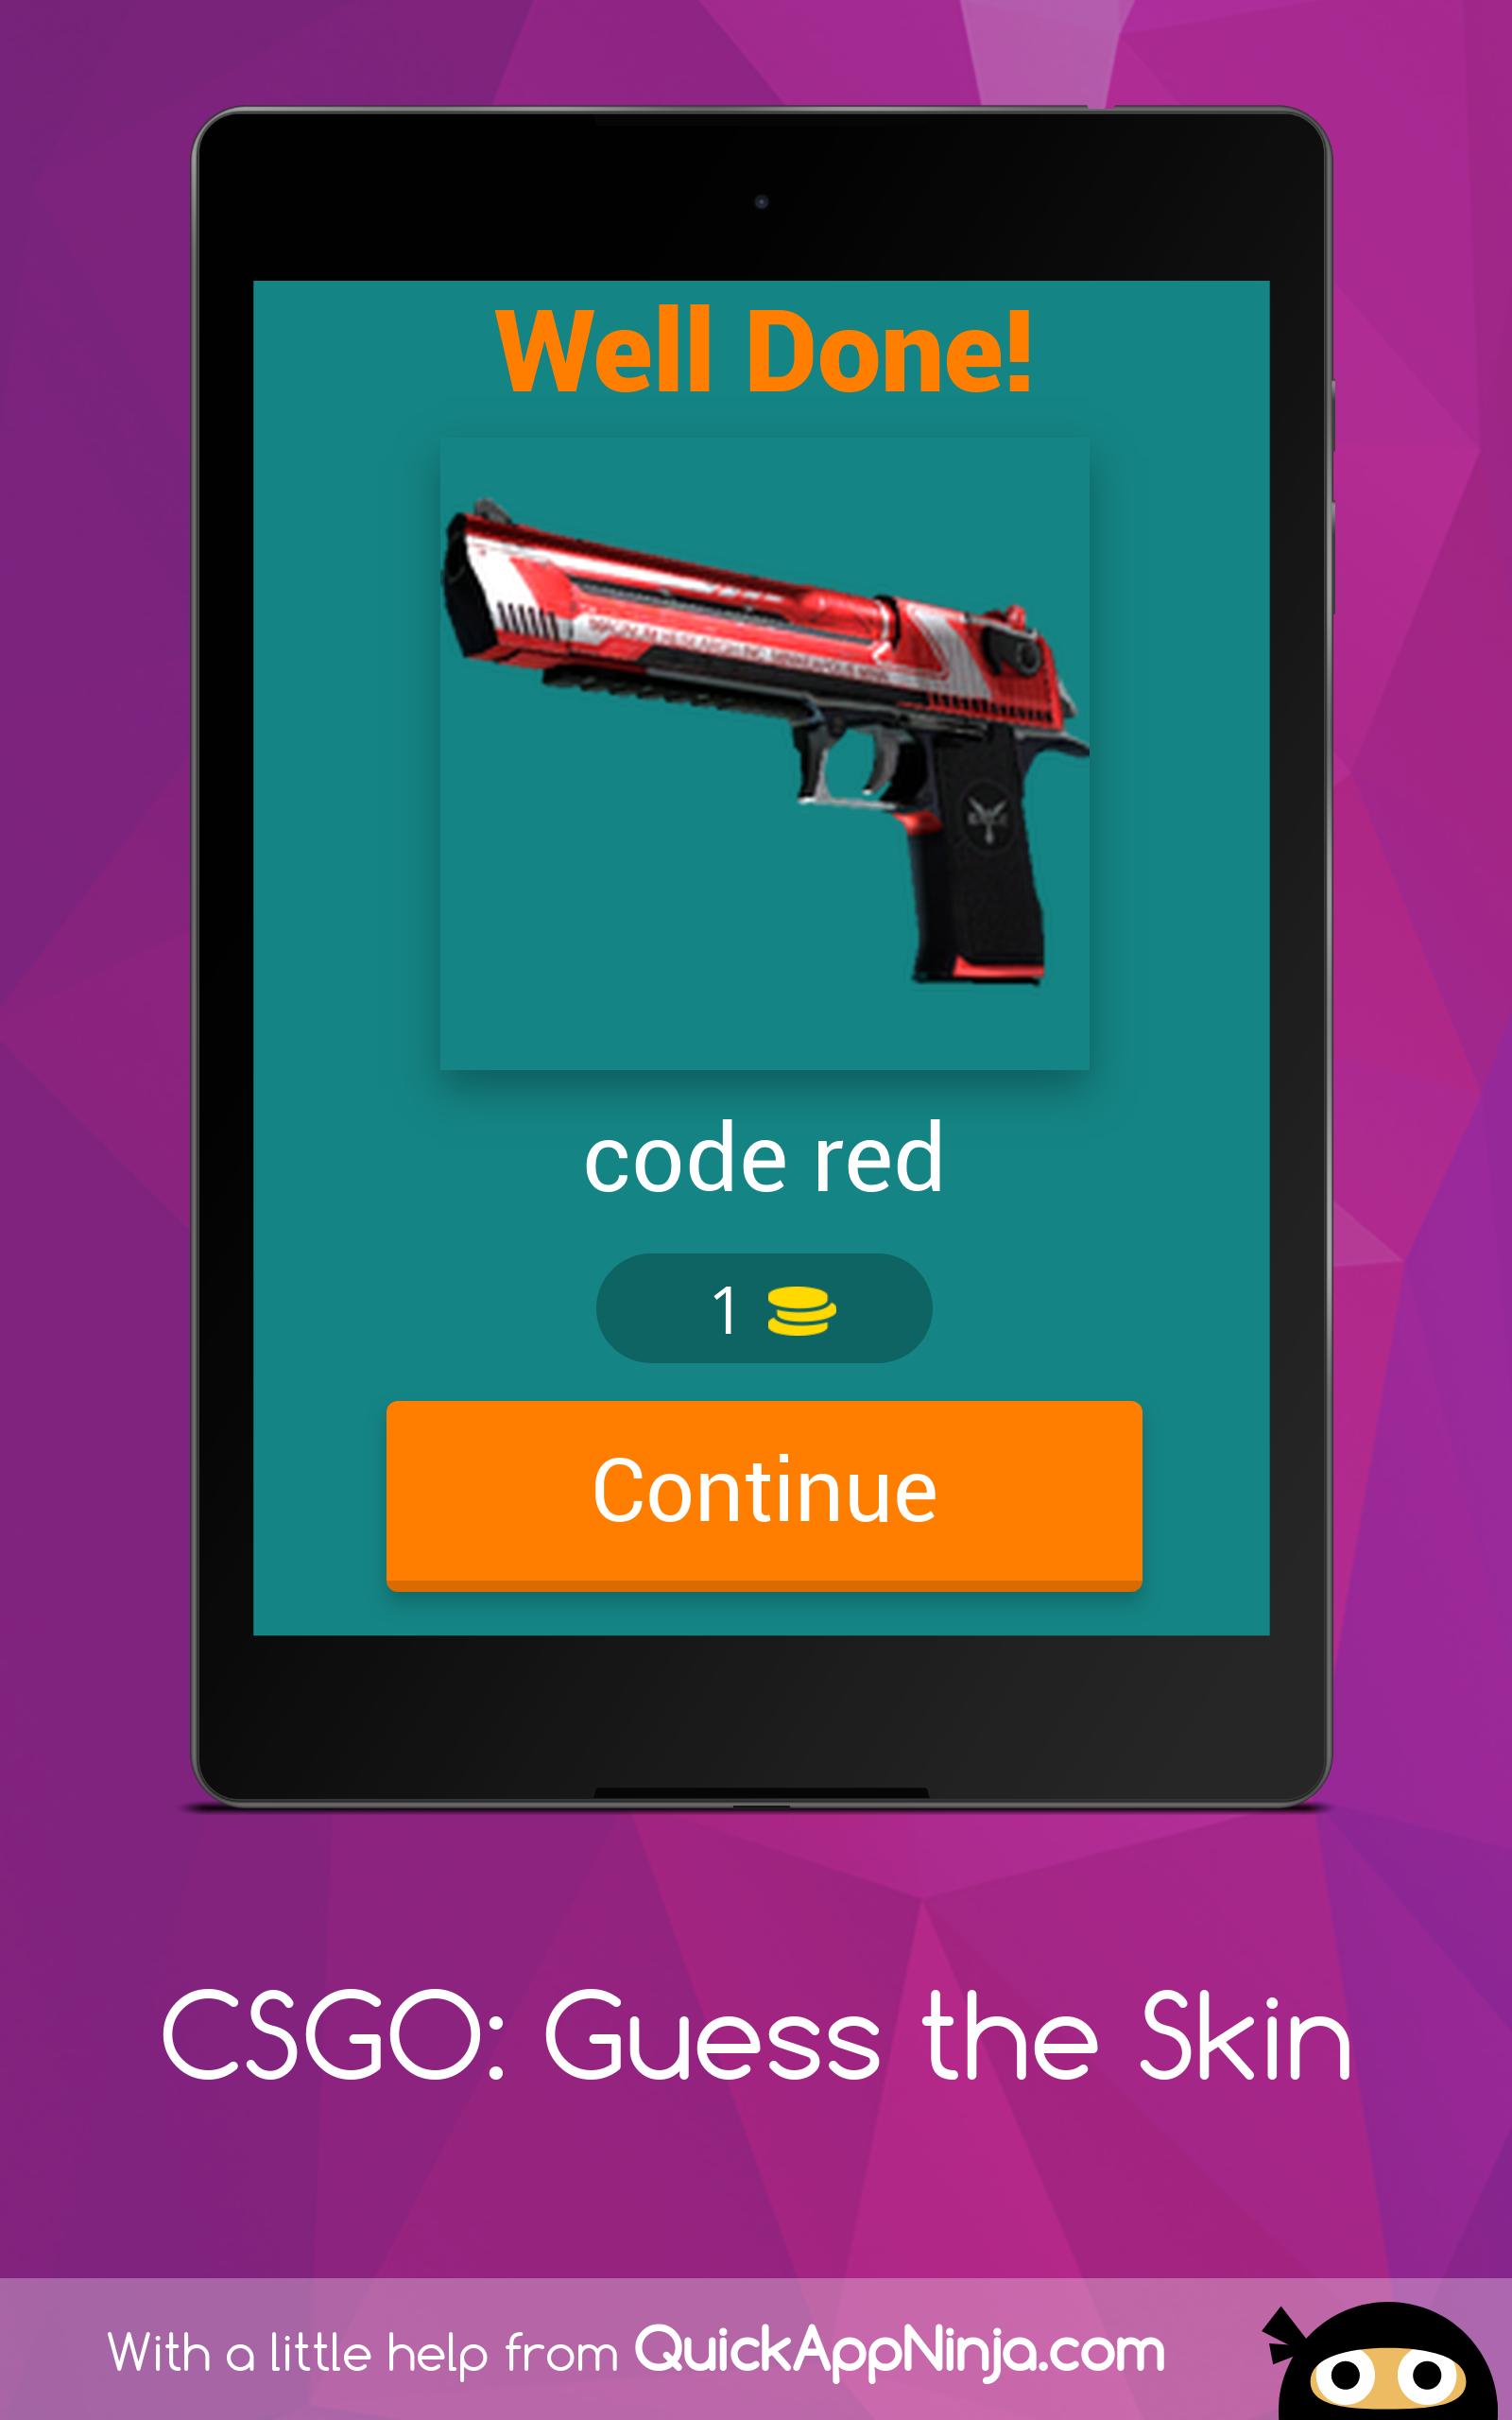 CSGO: Guess the Skin for Android - APK Download